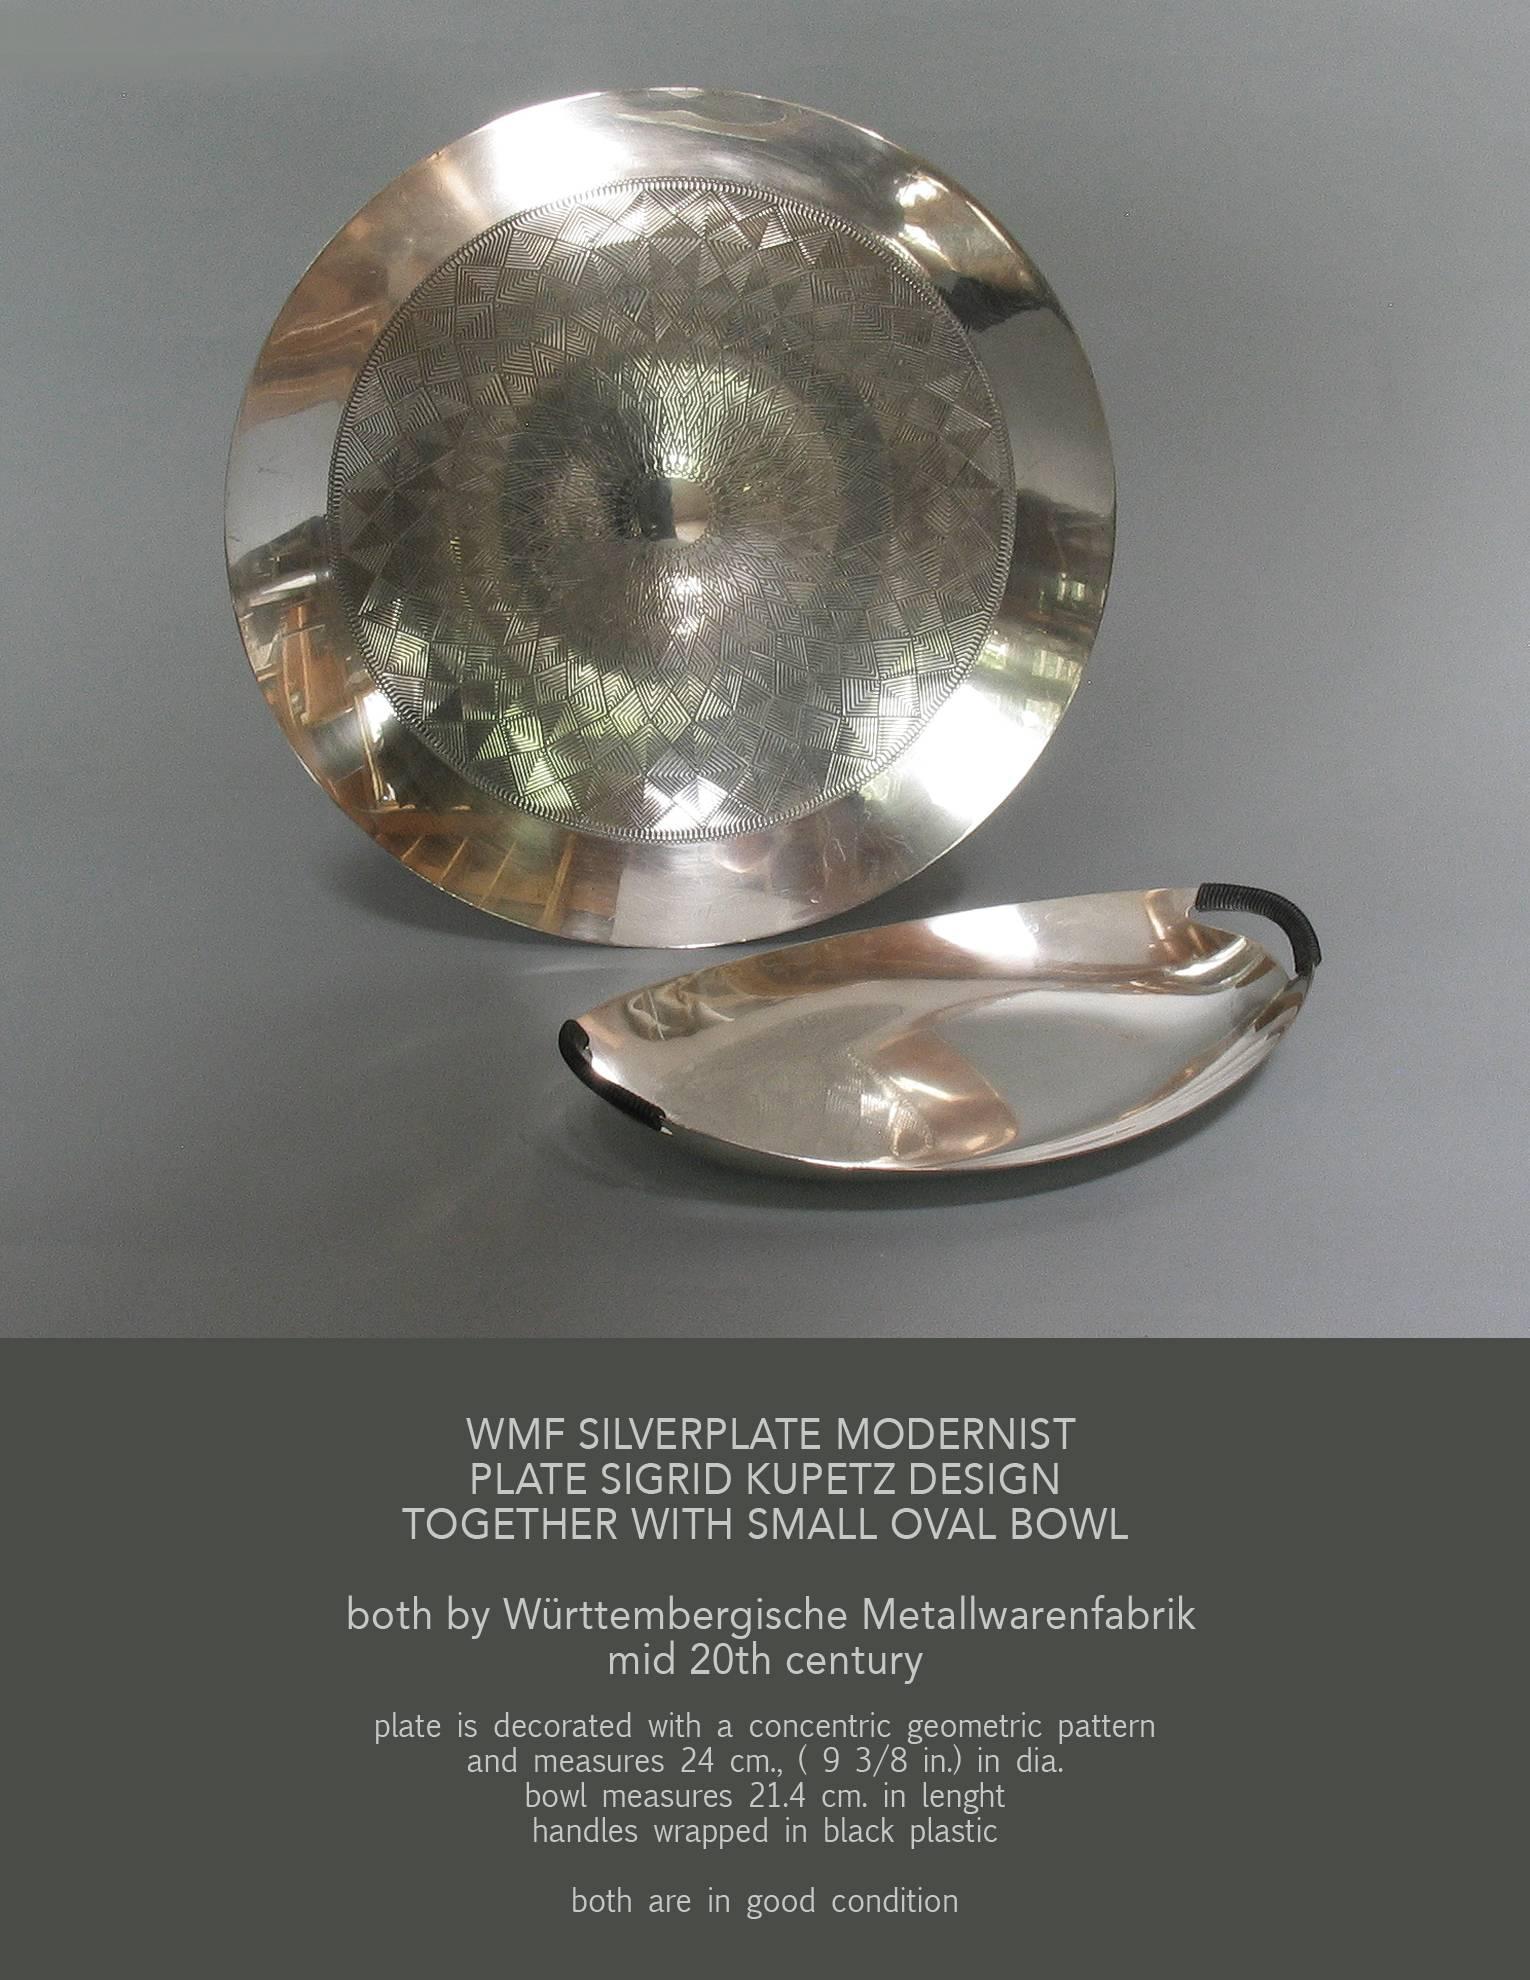 WMF silver plate modernist plate Sigrid Kupetz design with small oval bowl, both by Wurttembergische Metallwarenfabrik, mid-20th century. The plate is decorated with concentric geometric pattern and measures 9 3/8